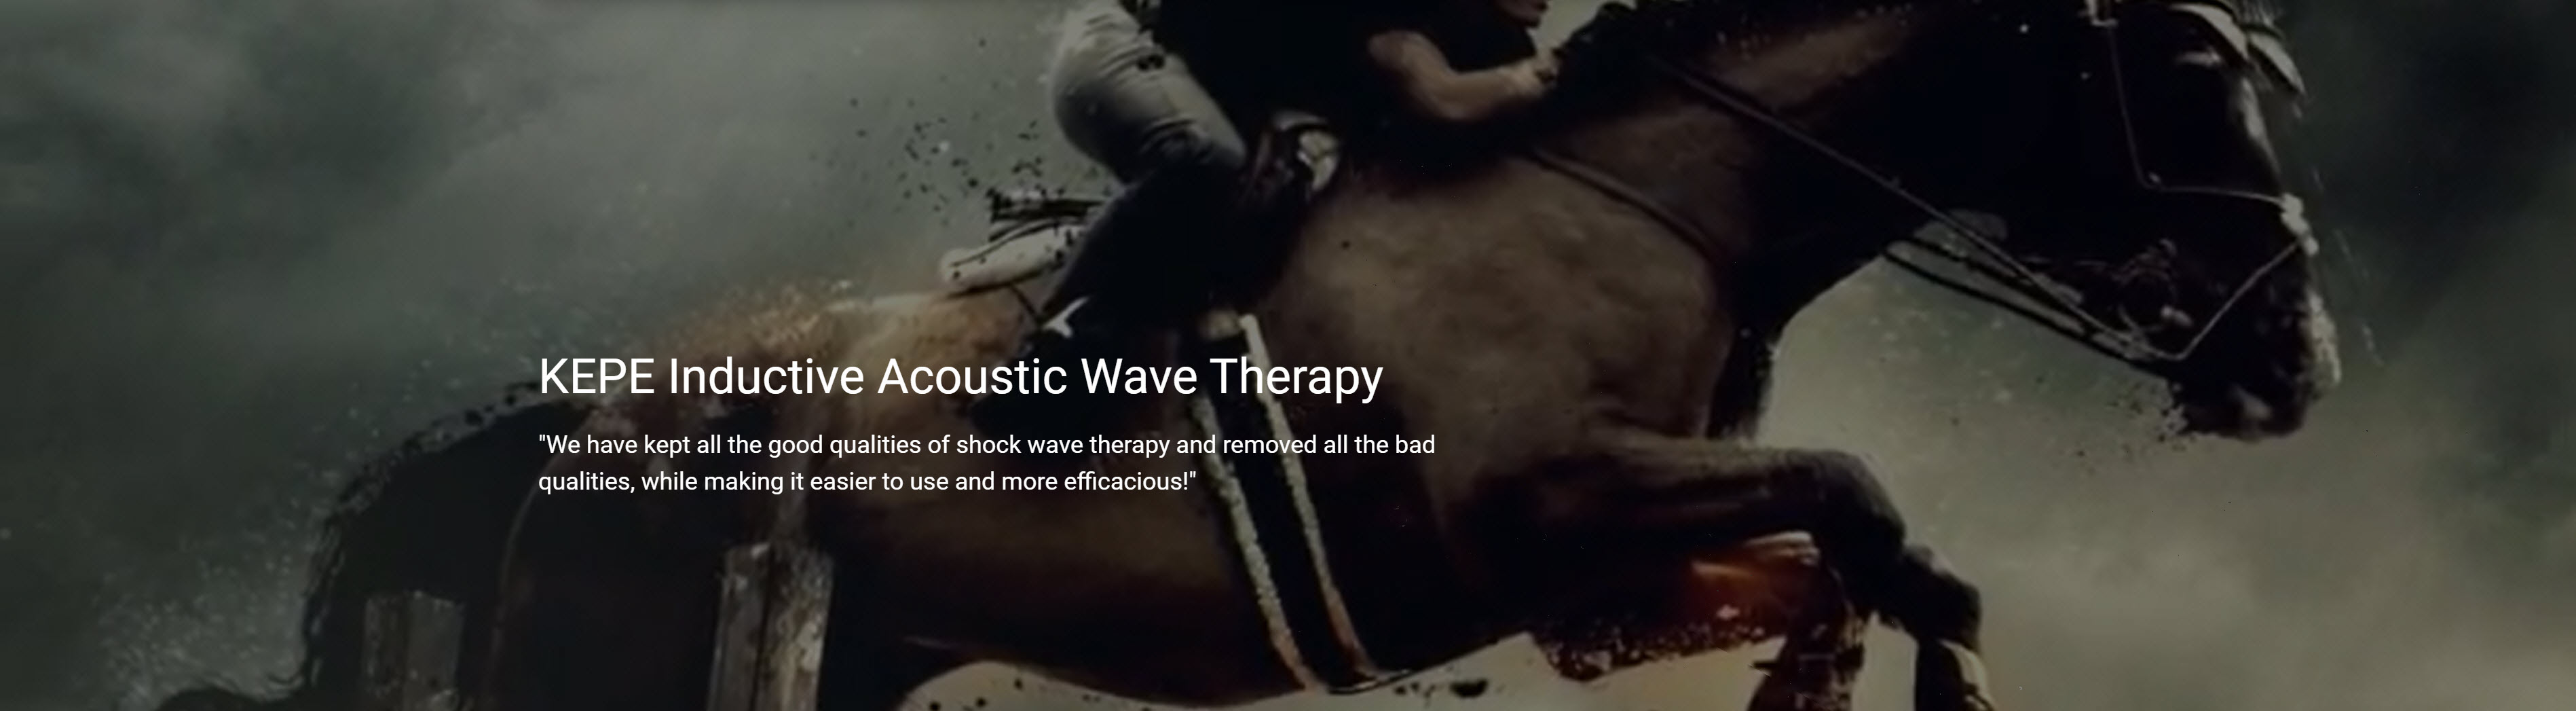 KEPE Inductive Acoustic Wave Therapy - We have kept all the good qualities of shock wave therapy and removed all the bad qualities, while making it easier to use and more efficacious!